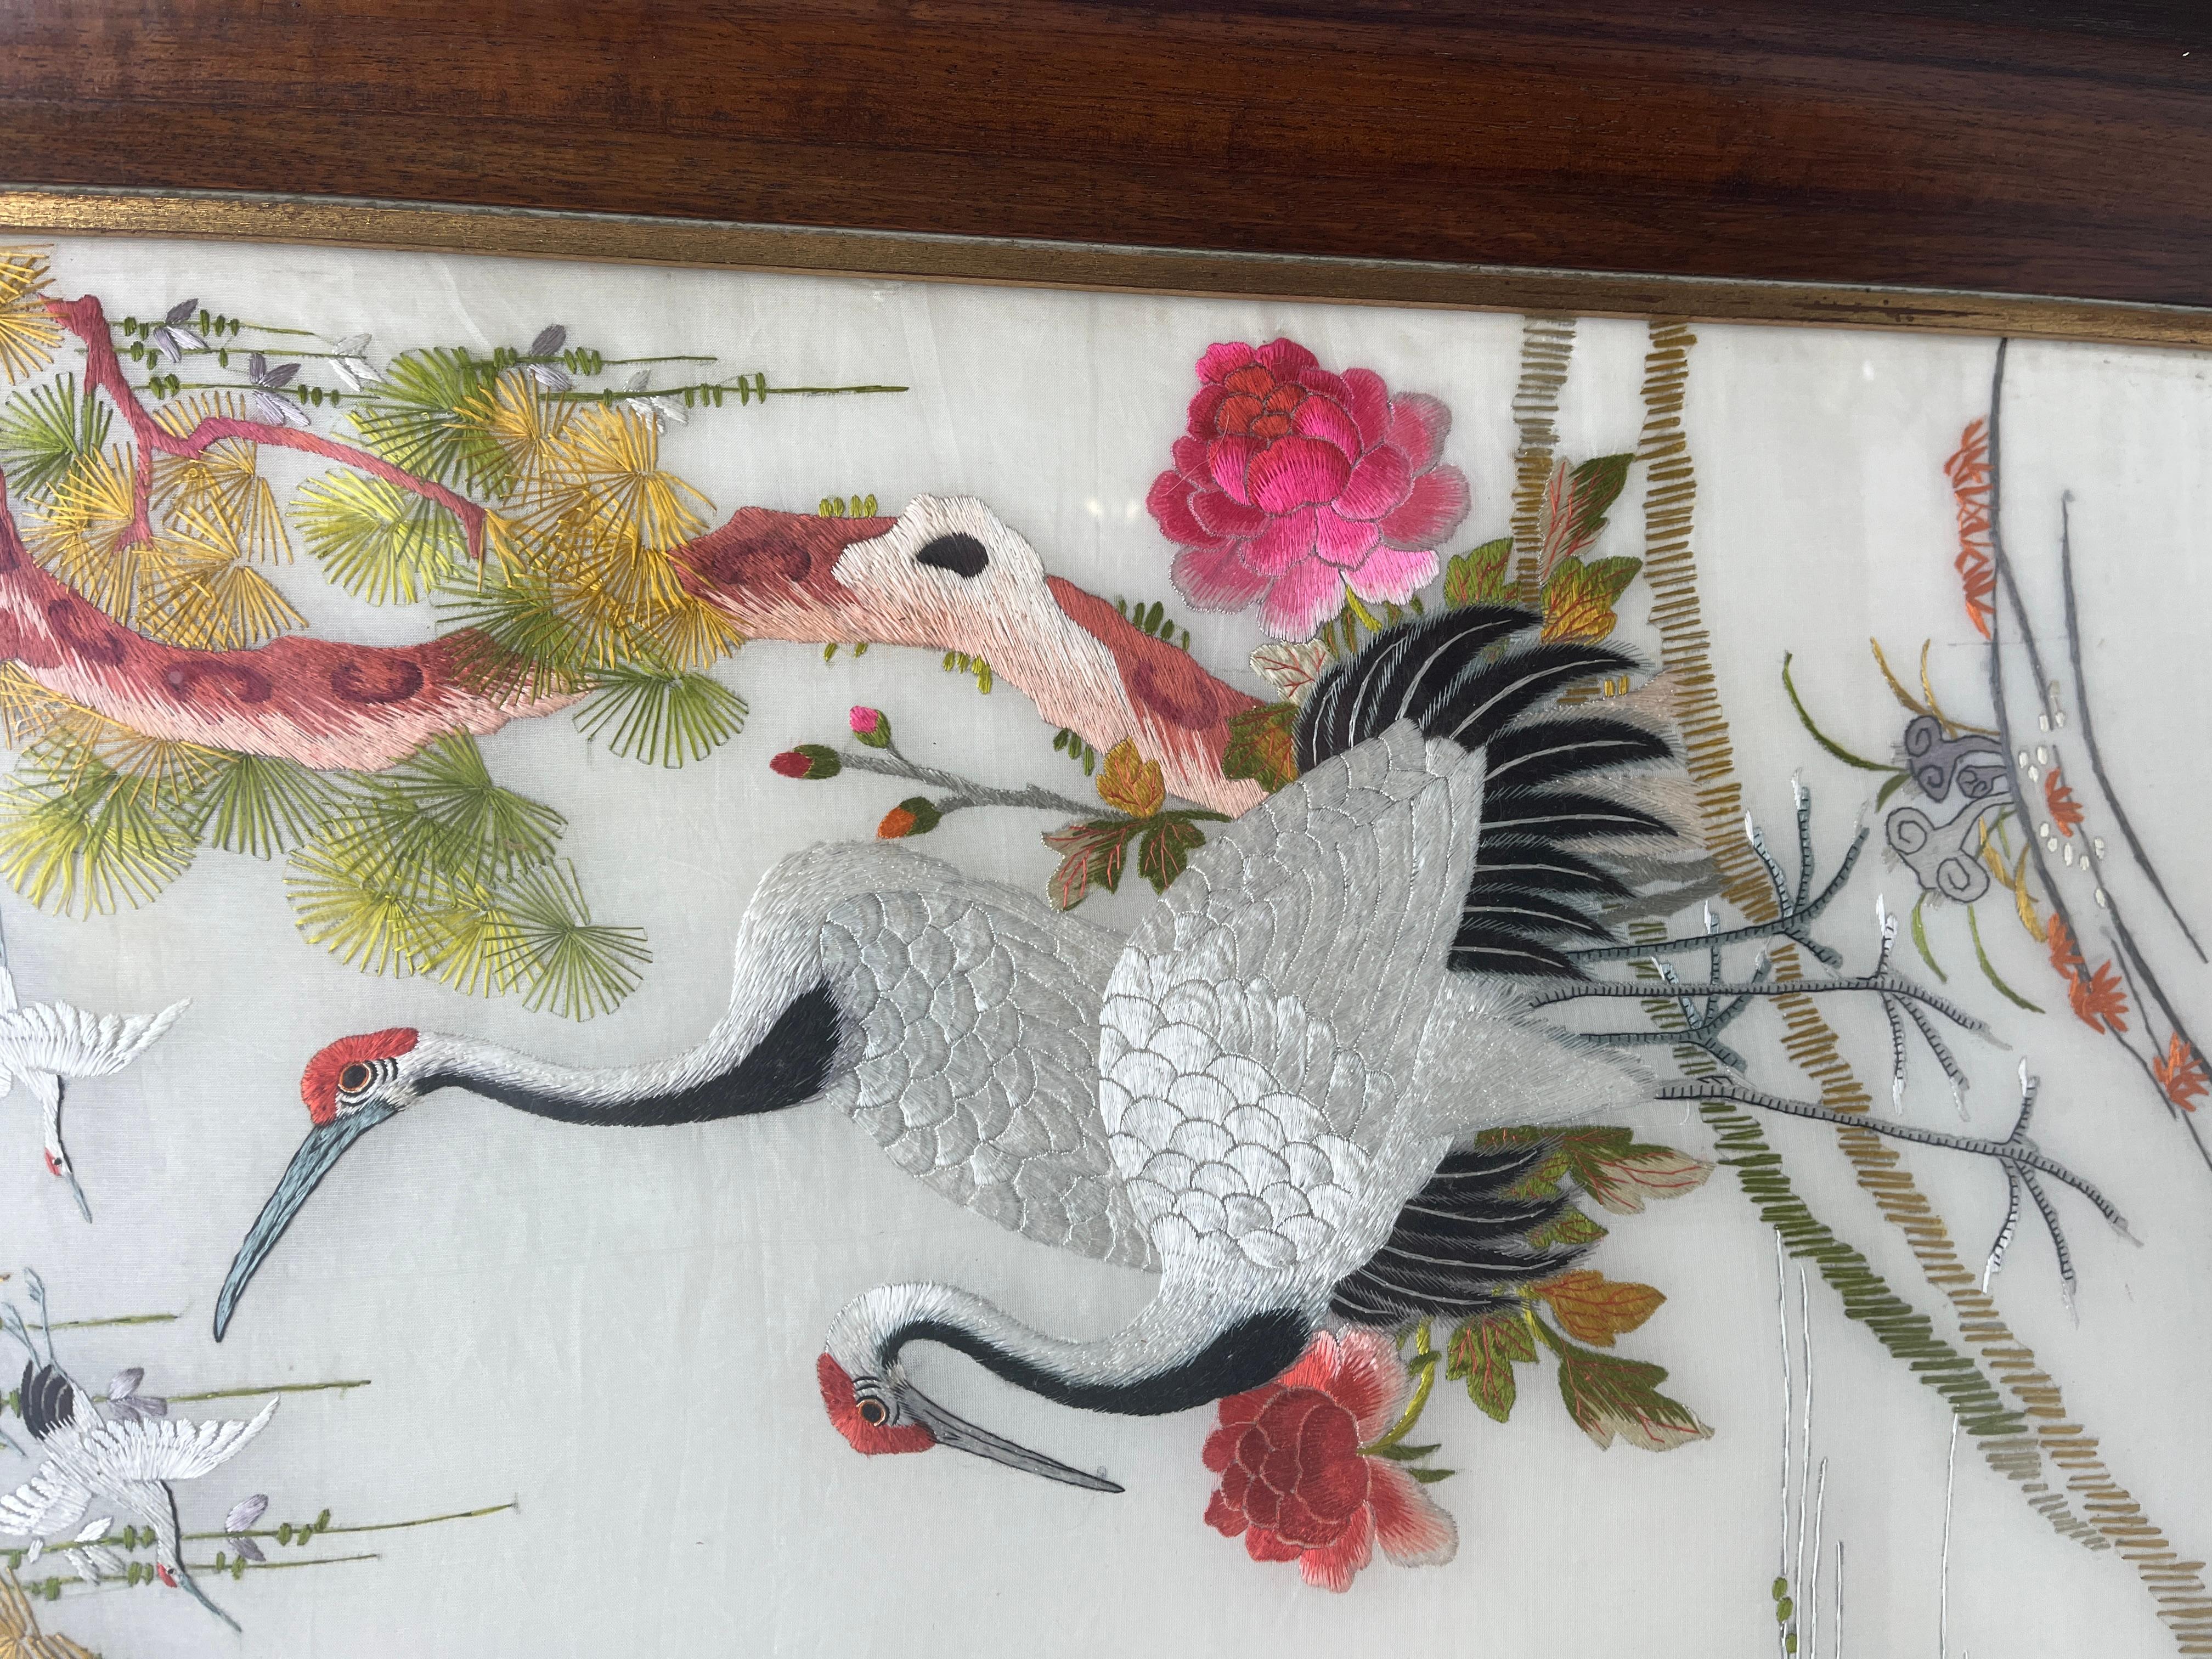 Chinese Silk Embroidered Pictures Depicts a Pair of Crane Birds in an Outdoor Setting For Sale